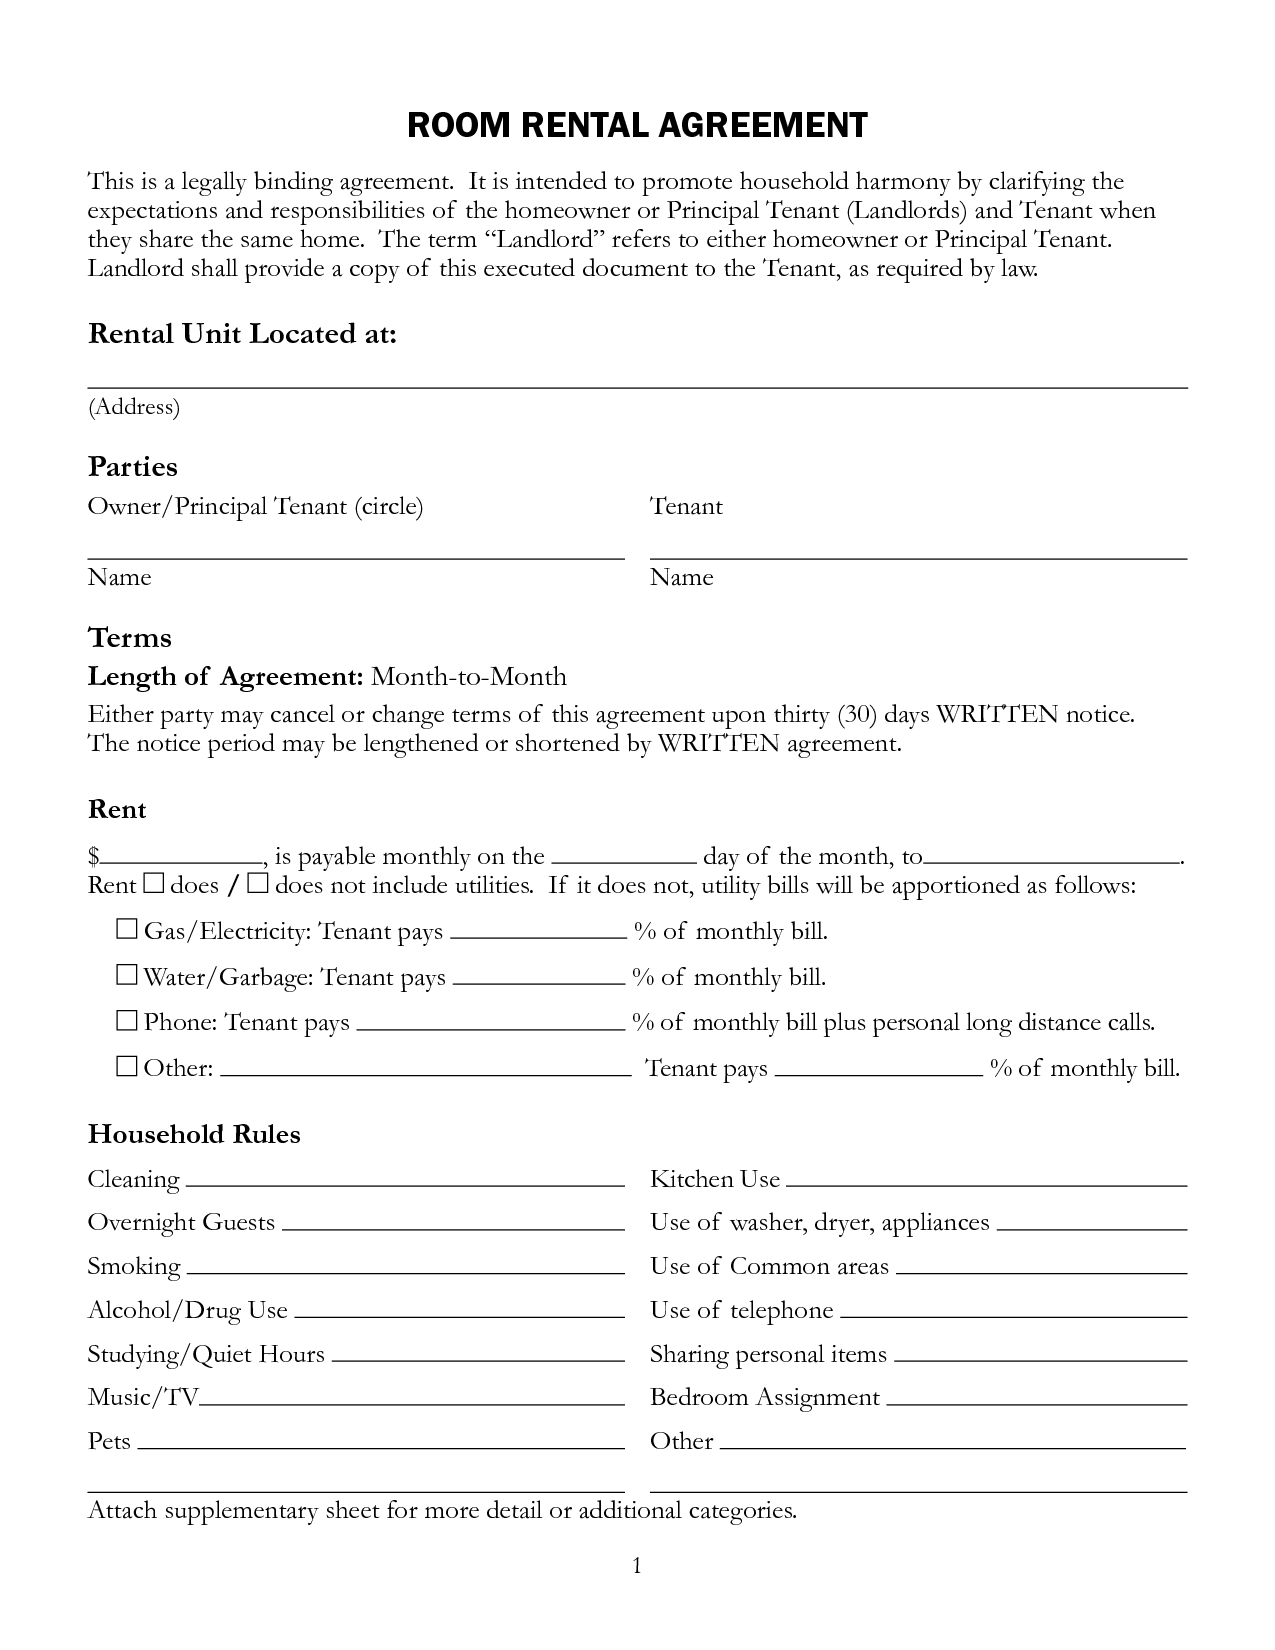 39 Simple Room Rental Agreement Templates - Template Archive - Free